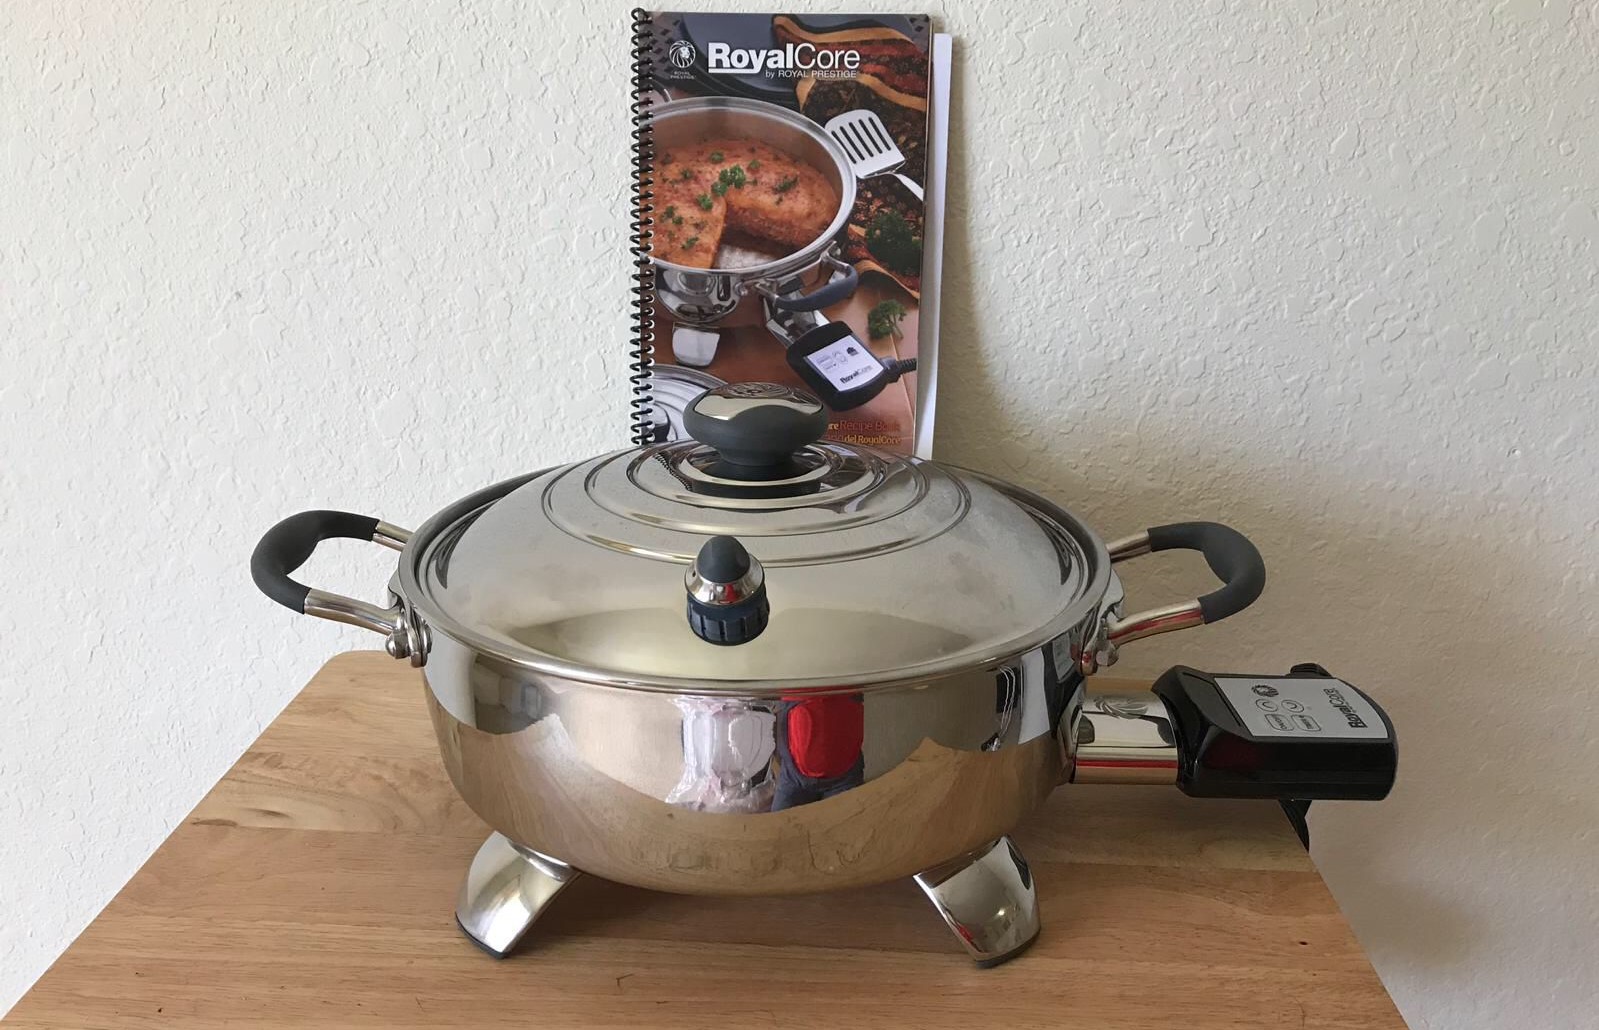 How To Cook Rice in a Royal Core Electric Skillet